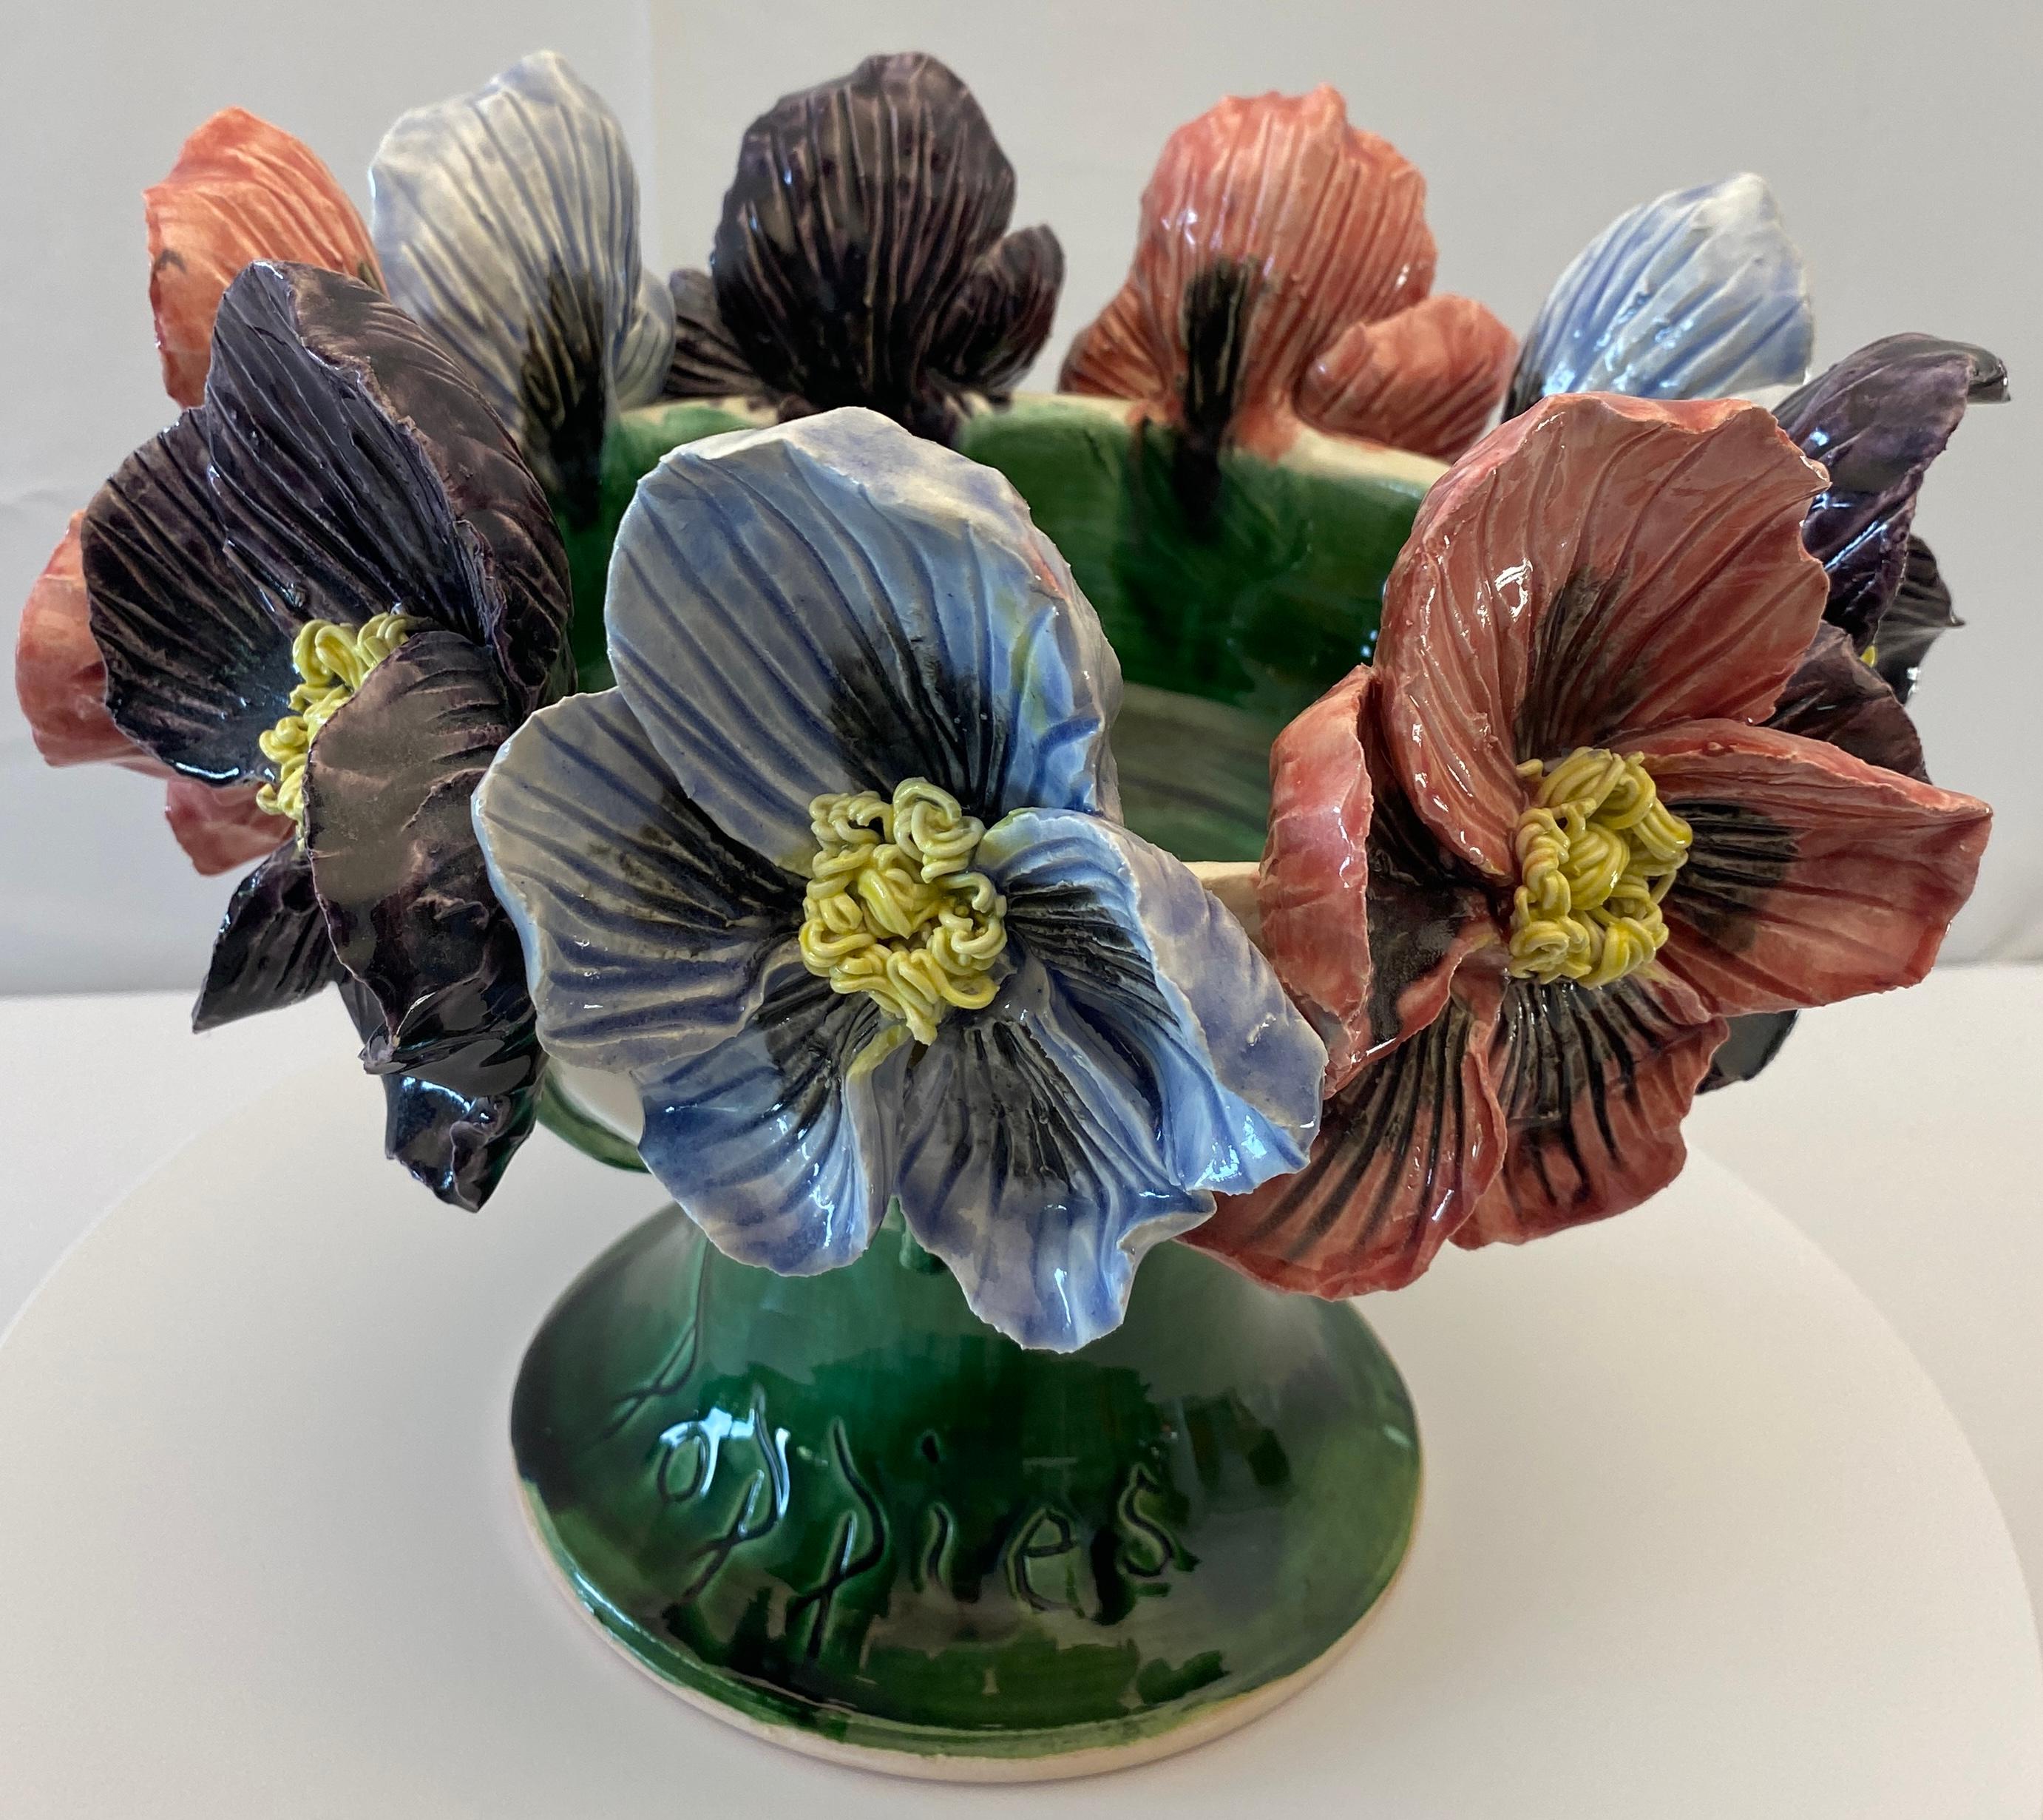 A fine hand-crafted ceramic vase bowl with high relief in the manner of Pair of Antique Barbotine Vases from France by Jean Pointu.
Work is titled 